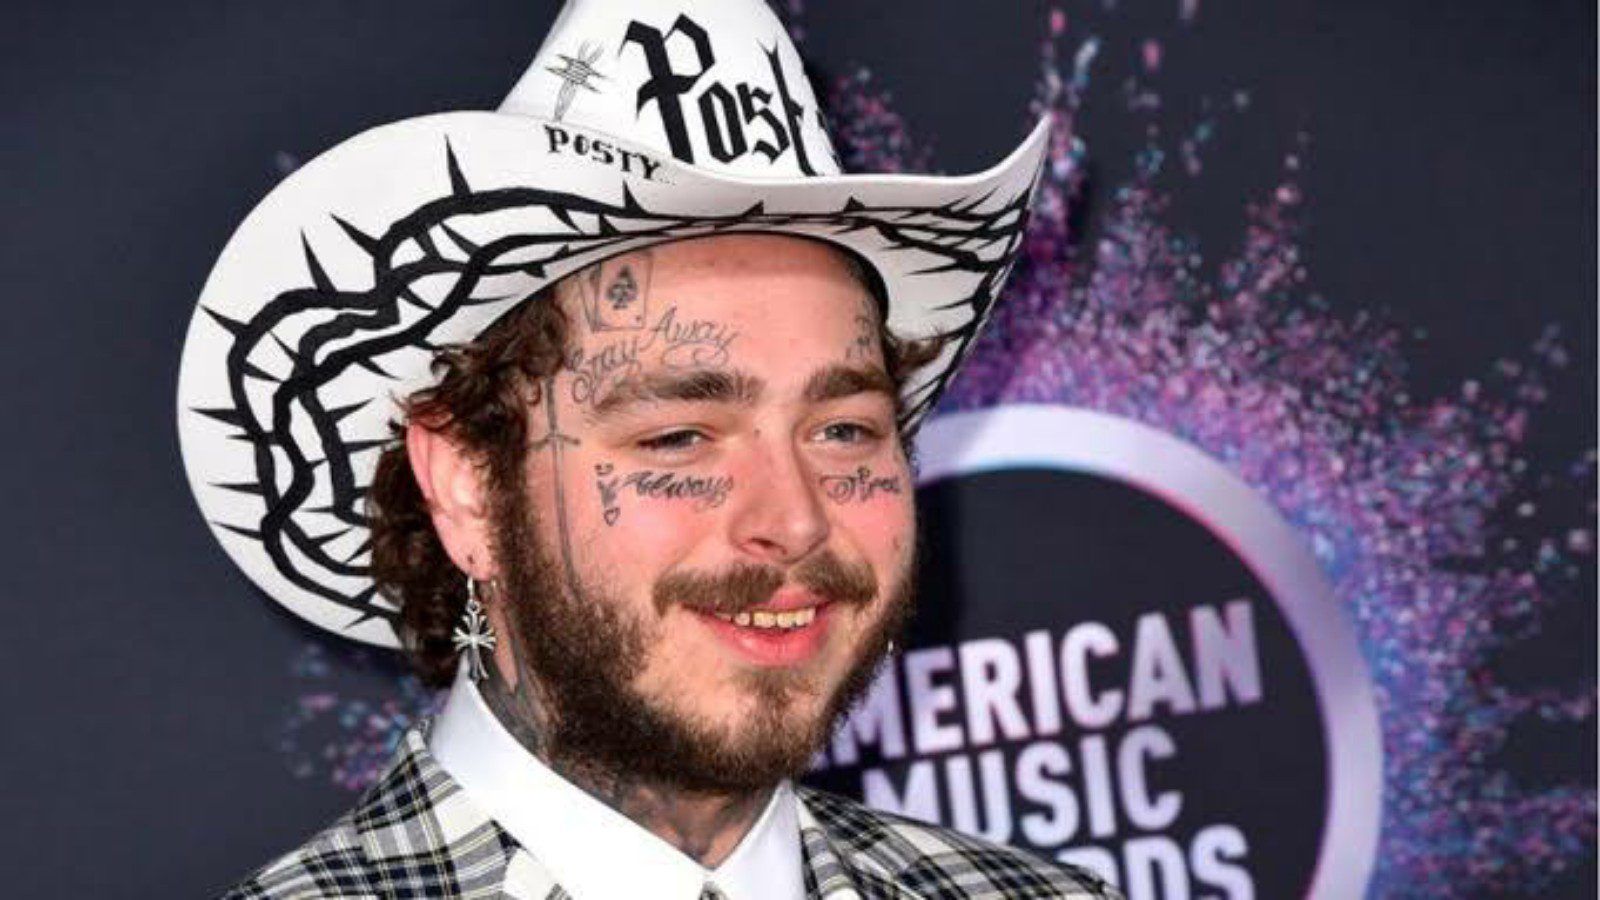 post Malone most famous songs